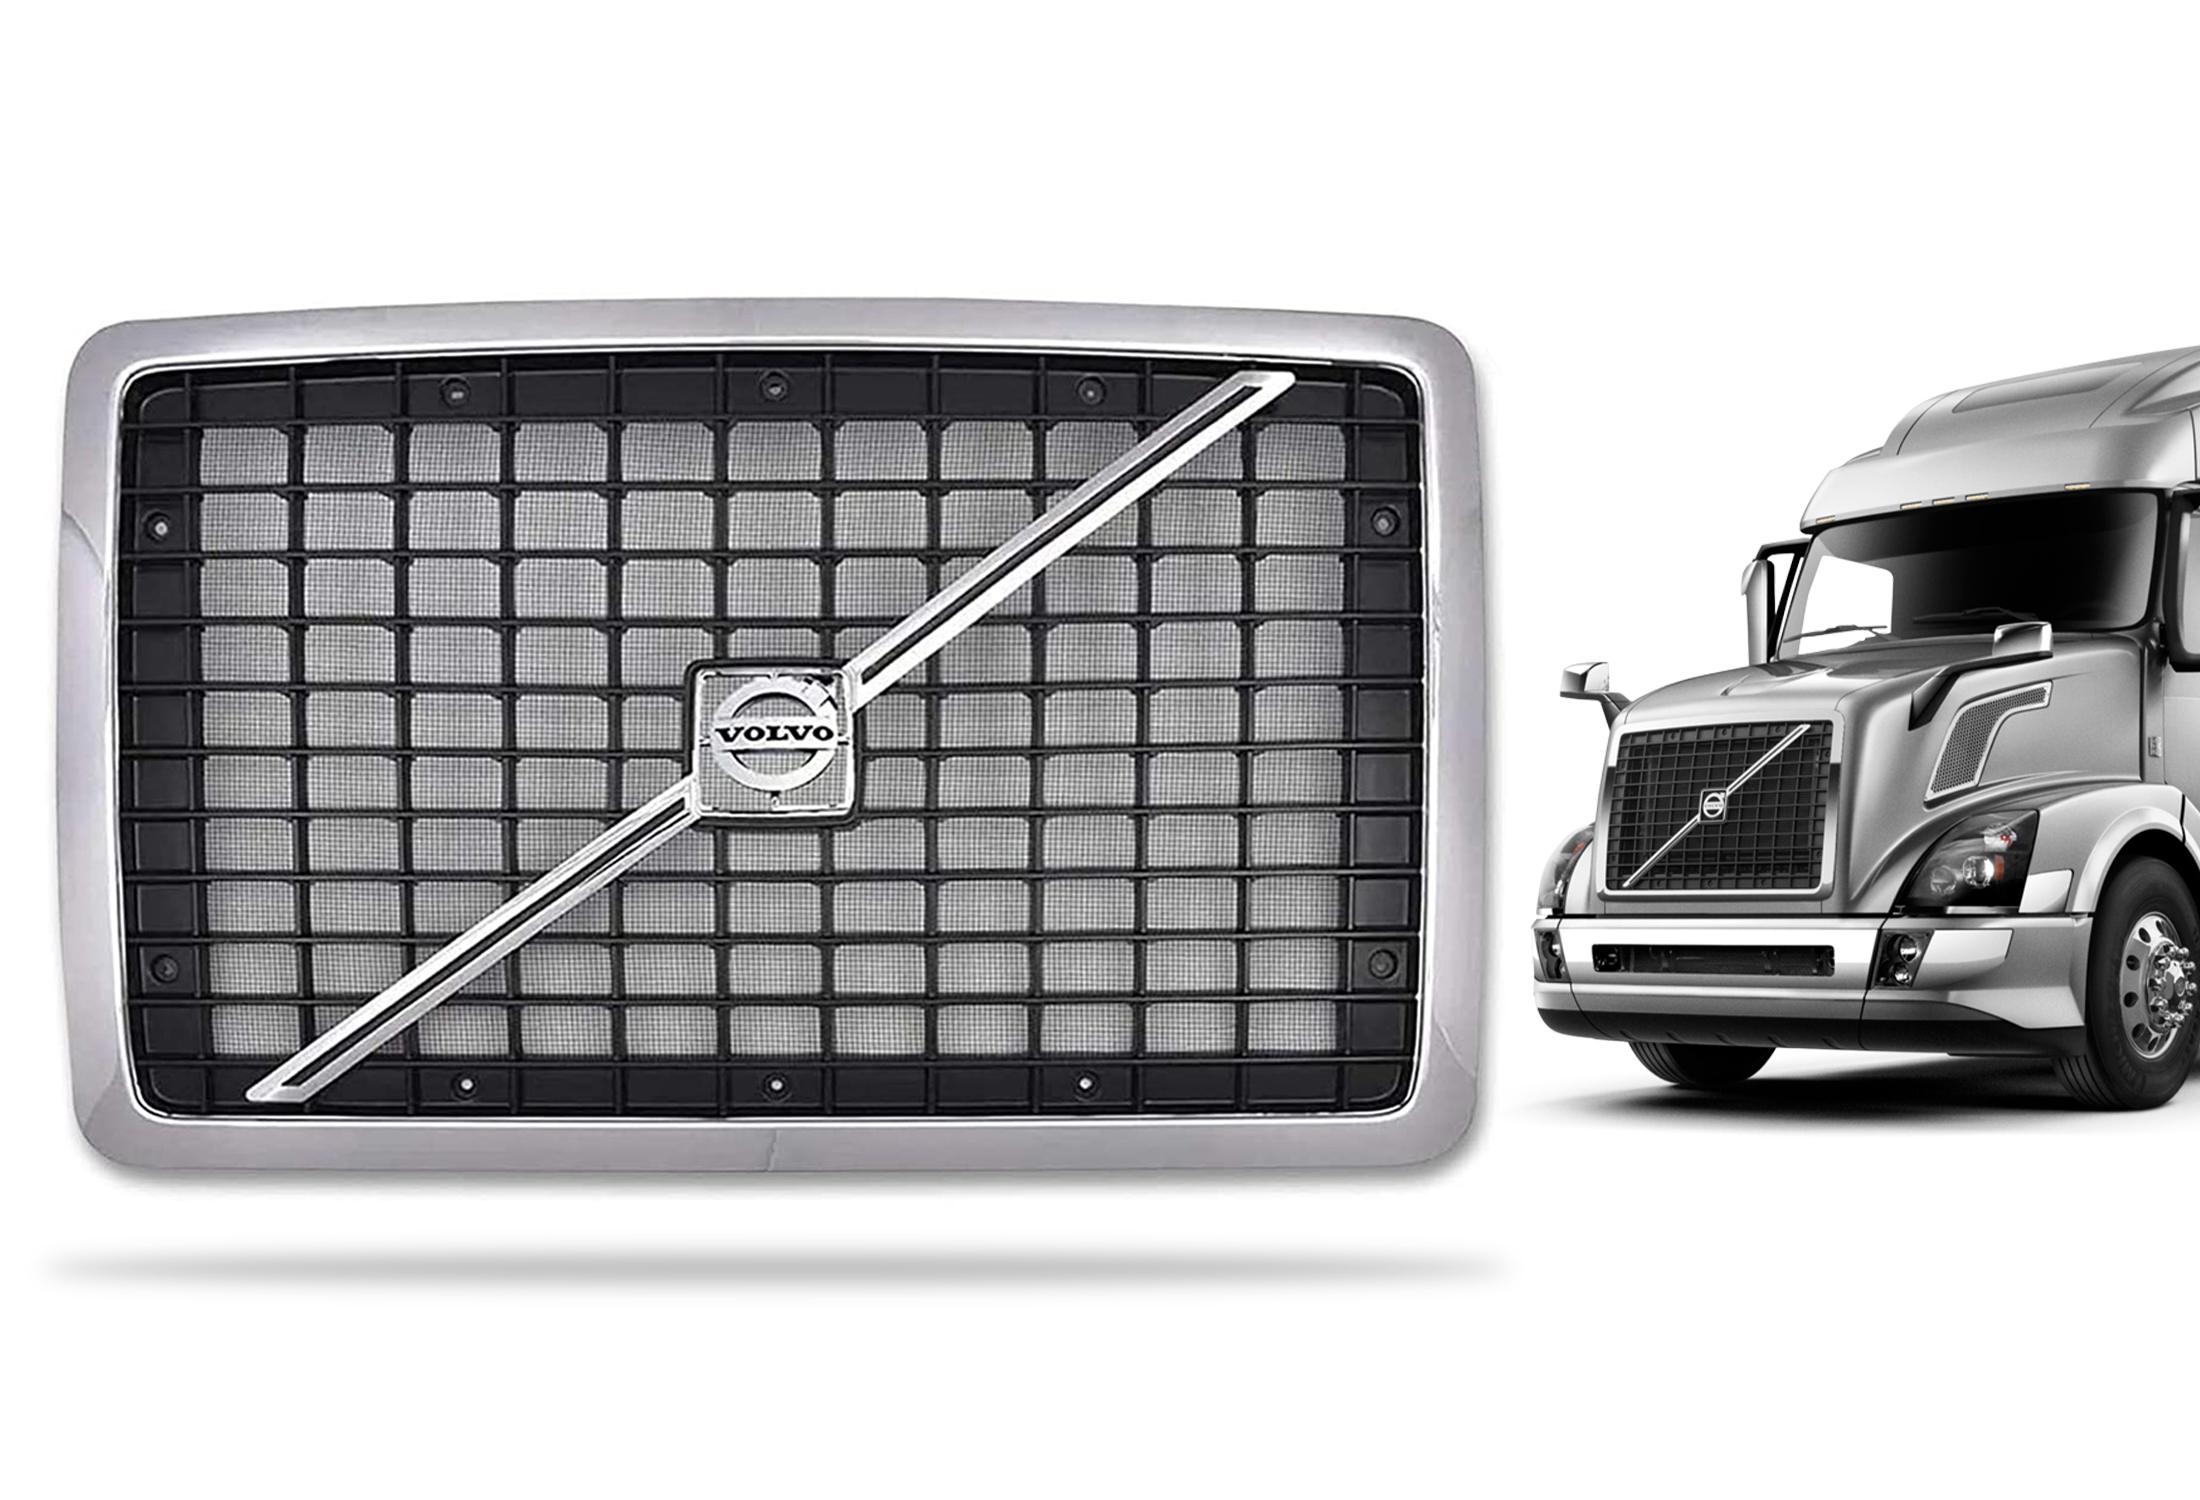 KOZAK compatible with Volvo VNL 2004-2016 Truck Accessories Aftermarket Chrome Finish Front Grille with Bug Net Screen PLUS Logo Emblem with Stripe, 2x22 inch Windshield Wipers and KOZAK Vest - image 3 of 7